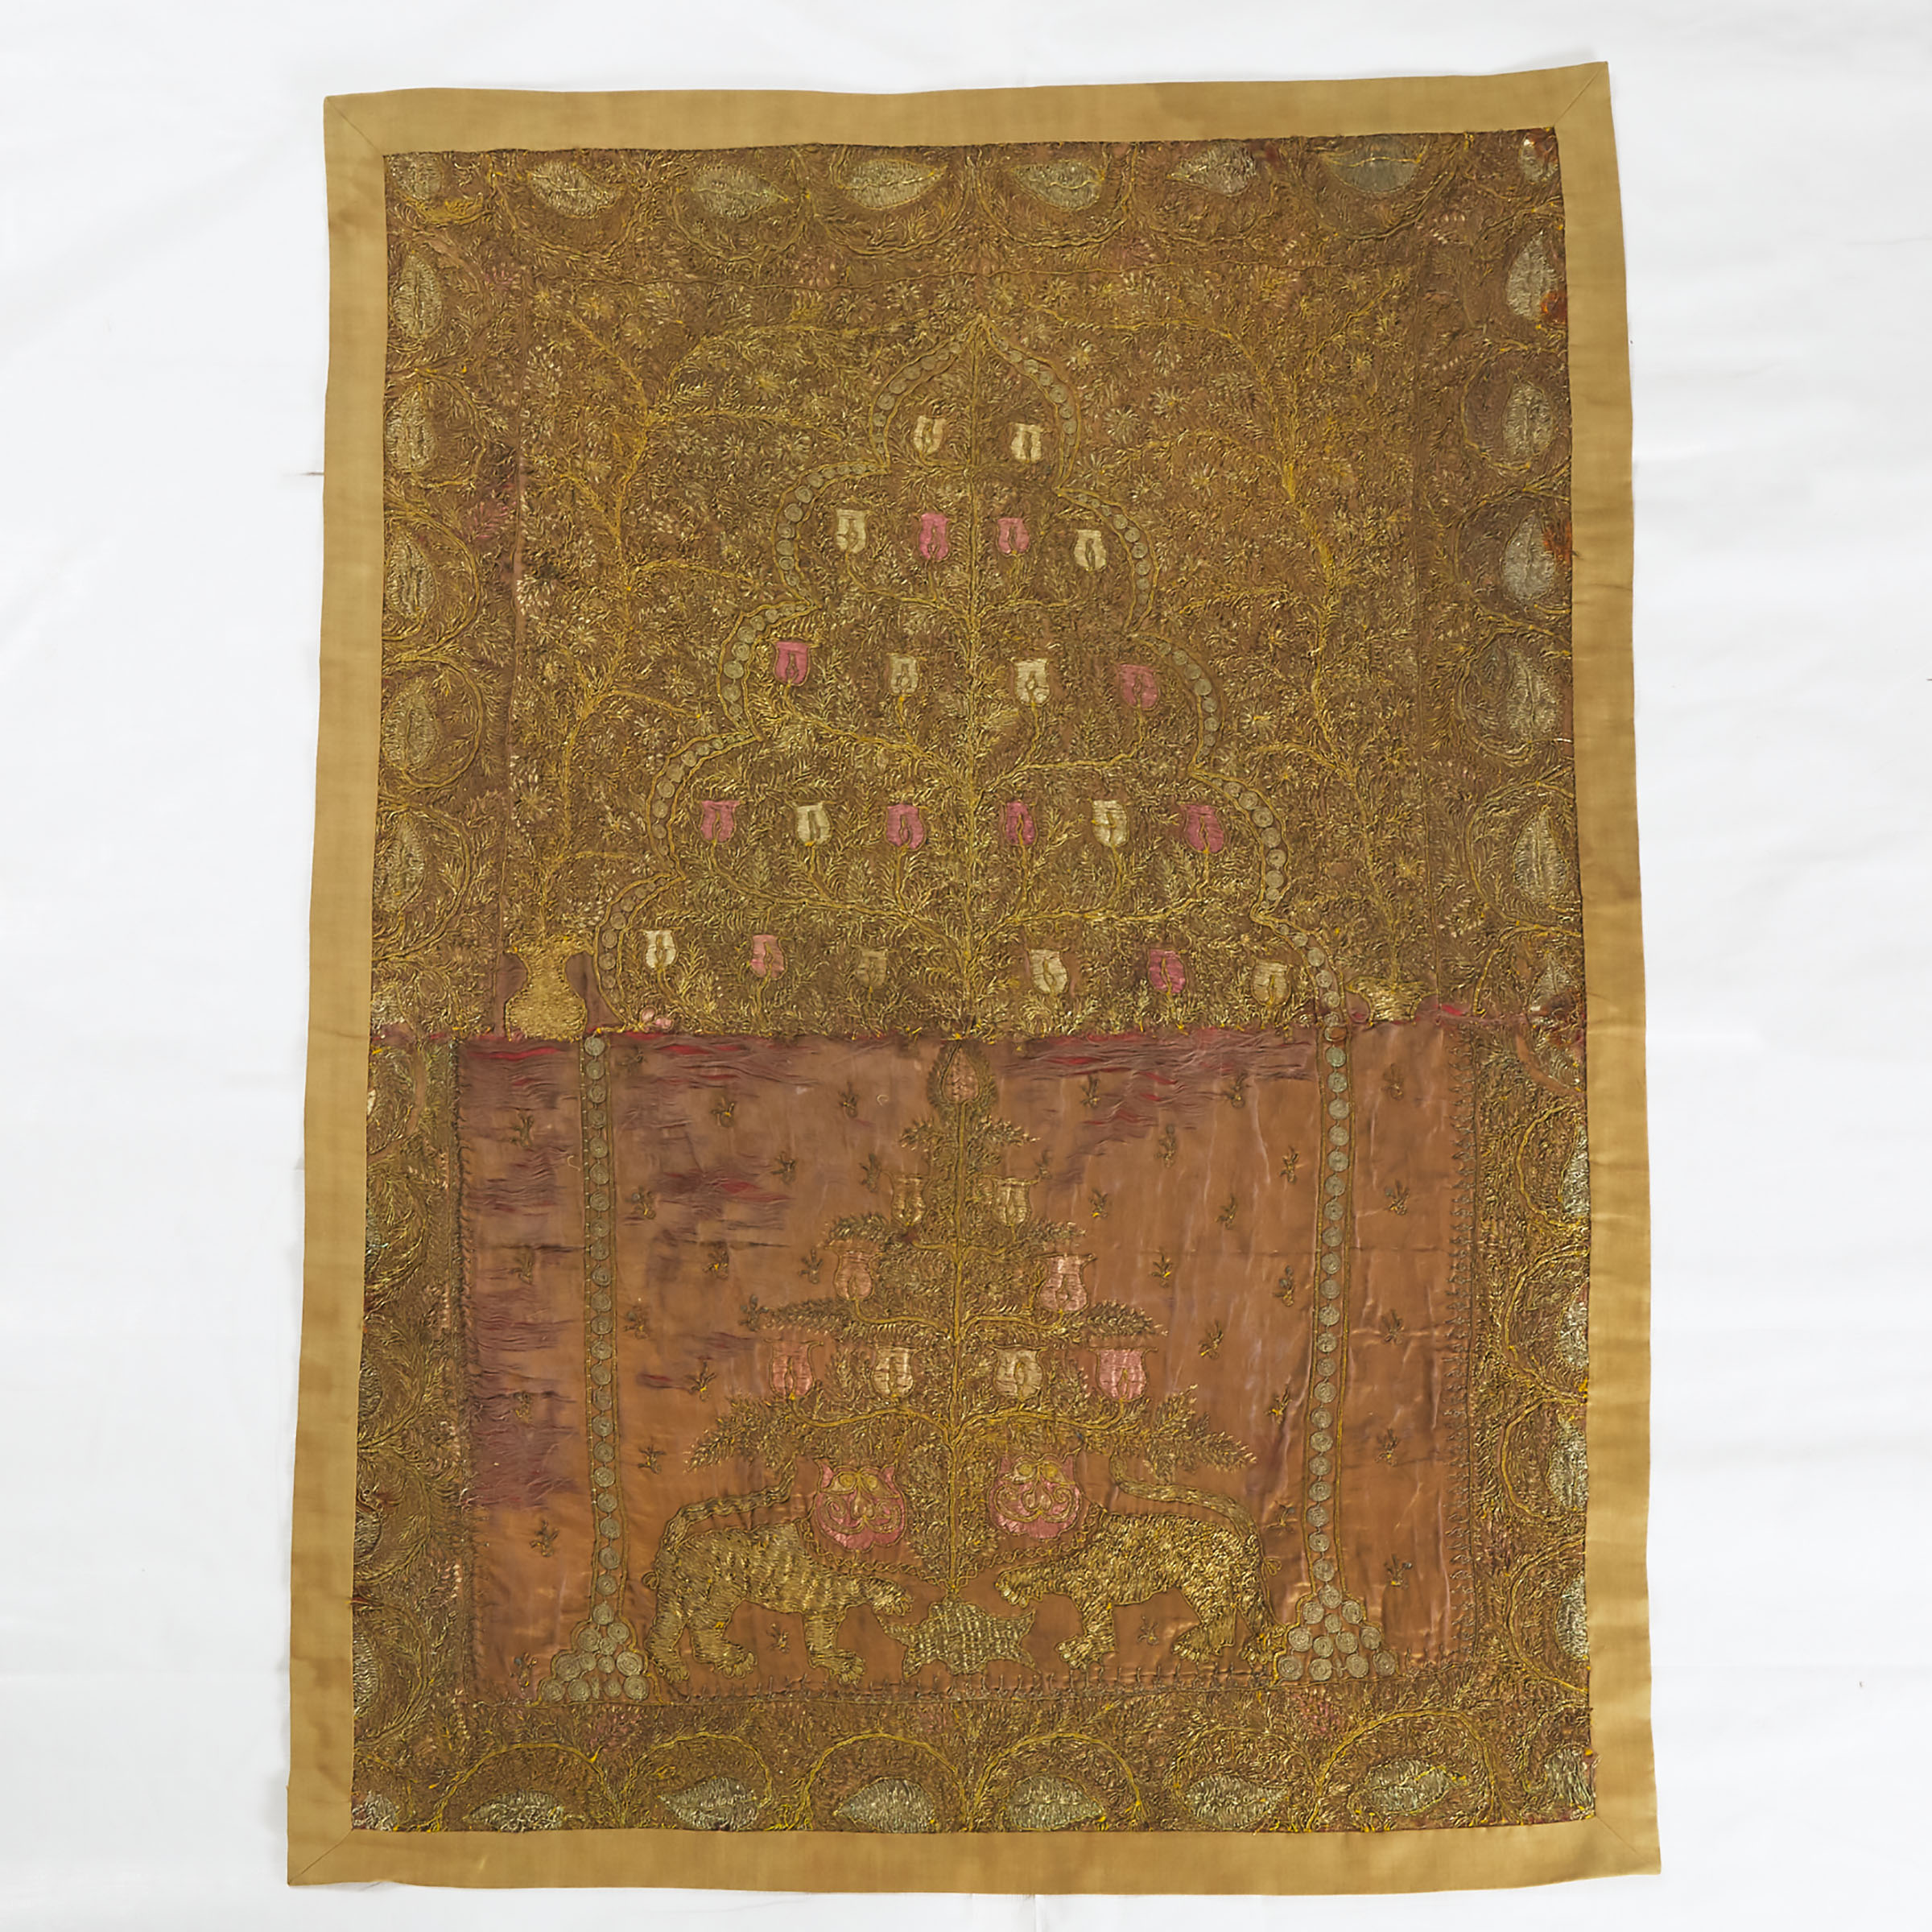 Persian Metallic And Silk Thread Embroidered Wall Hanging, c.1650-1700